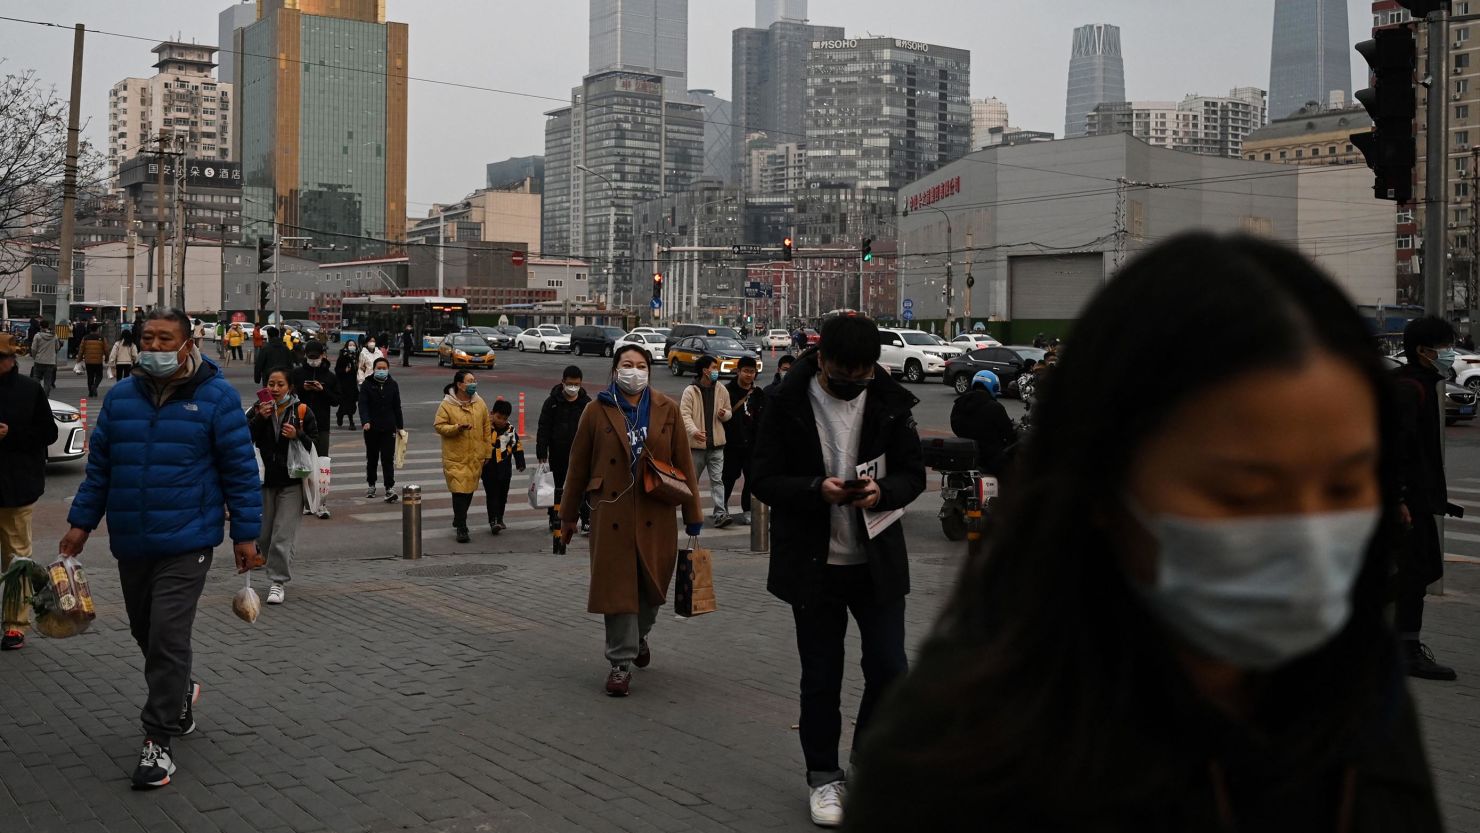 People walk on a street at the end of the workday in Beijing on March 17, 2023. (Photo by GREG BAKER / AFP) (Photo by GREG BAKER/AFP via Getty Images)